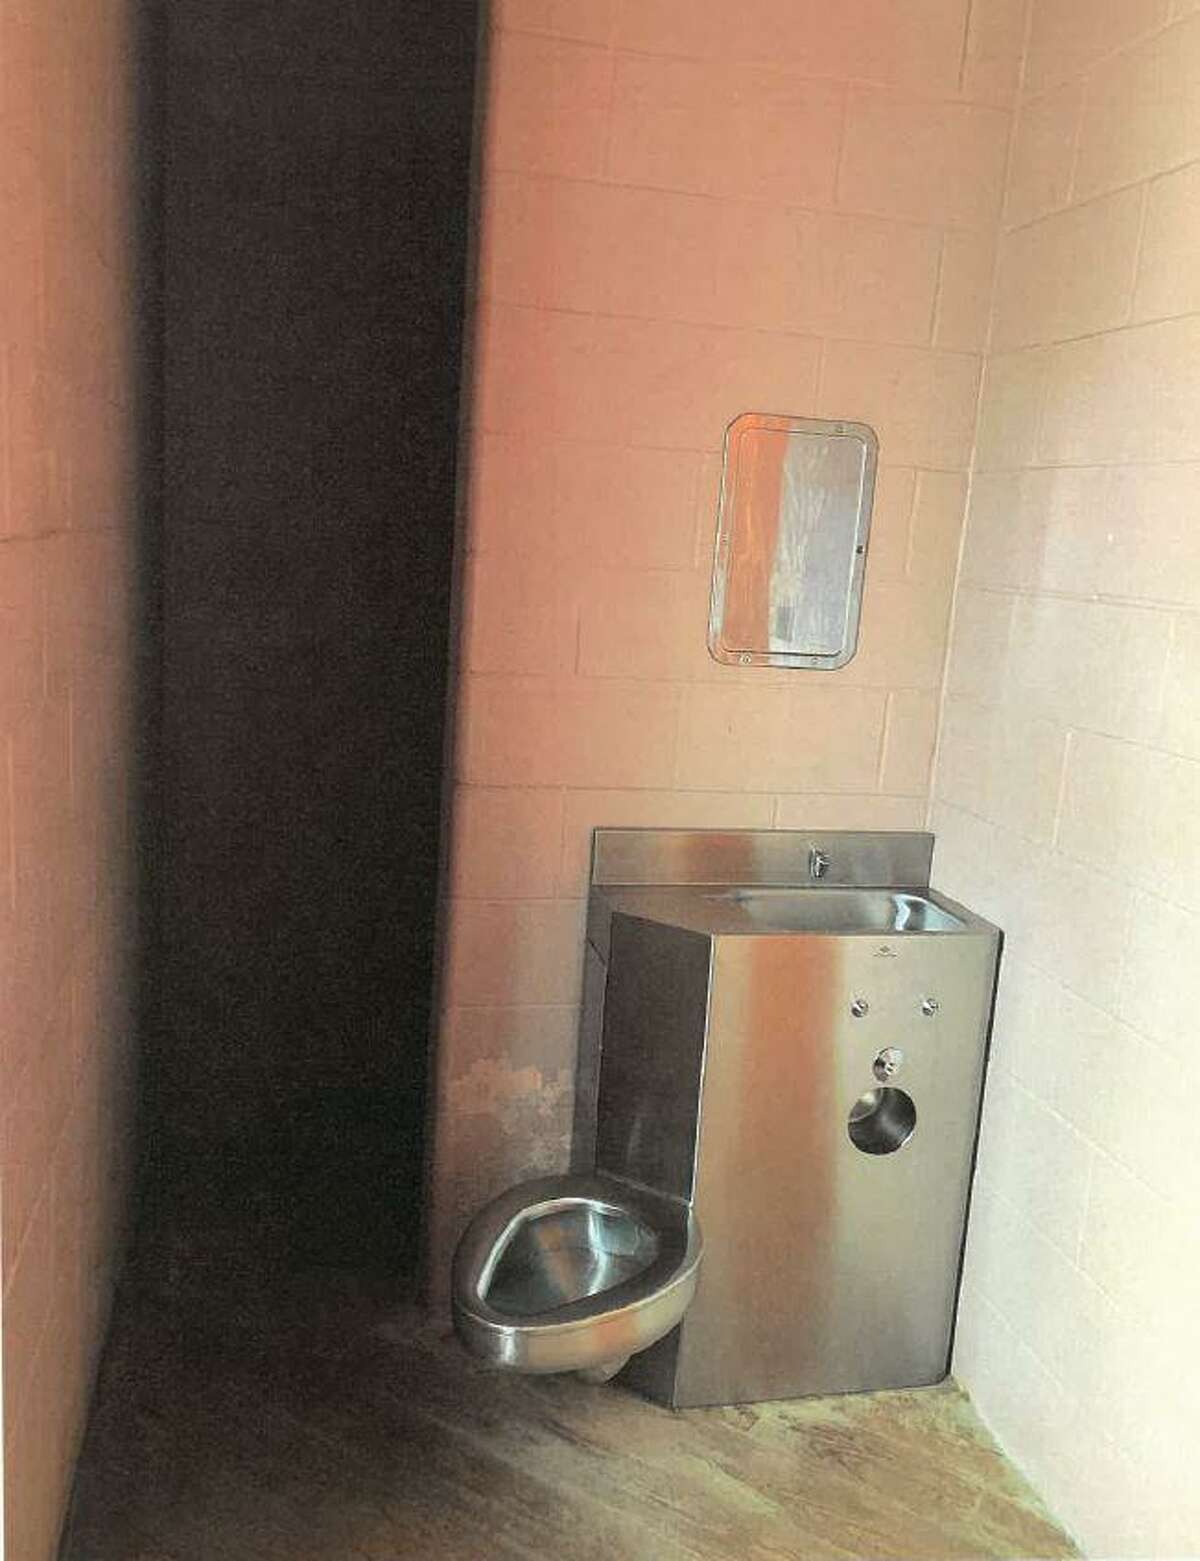 A photo taken by court-appointed monitors shows a bathroom in a unit that houses children with intense psychiatric needs at Hill Country Youth Ranch. They likened the conditions to prison. Founder Gary Priour said youth move into family-style cottages once they stabilize.